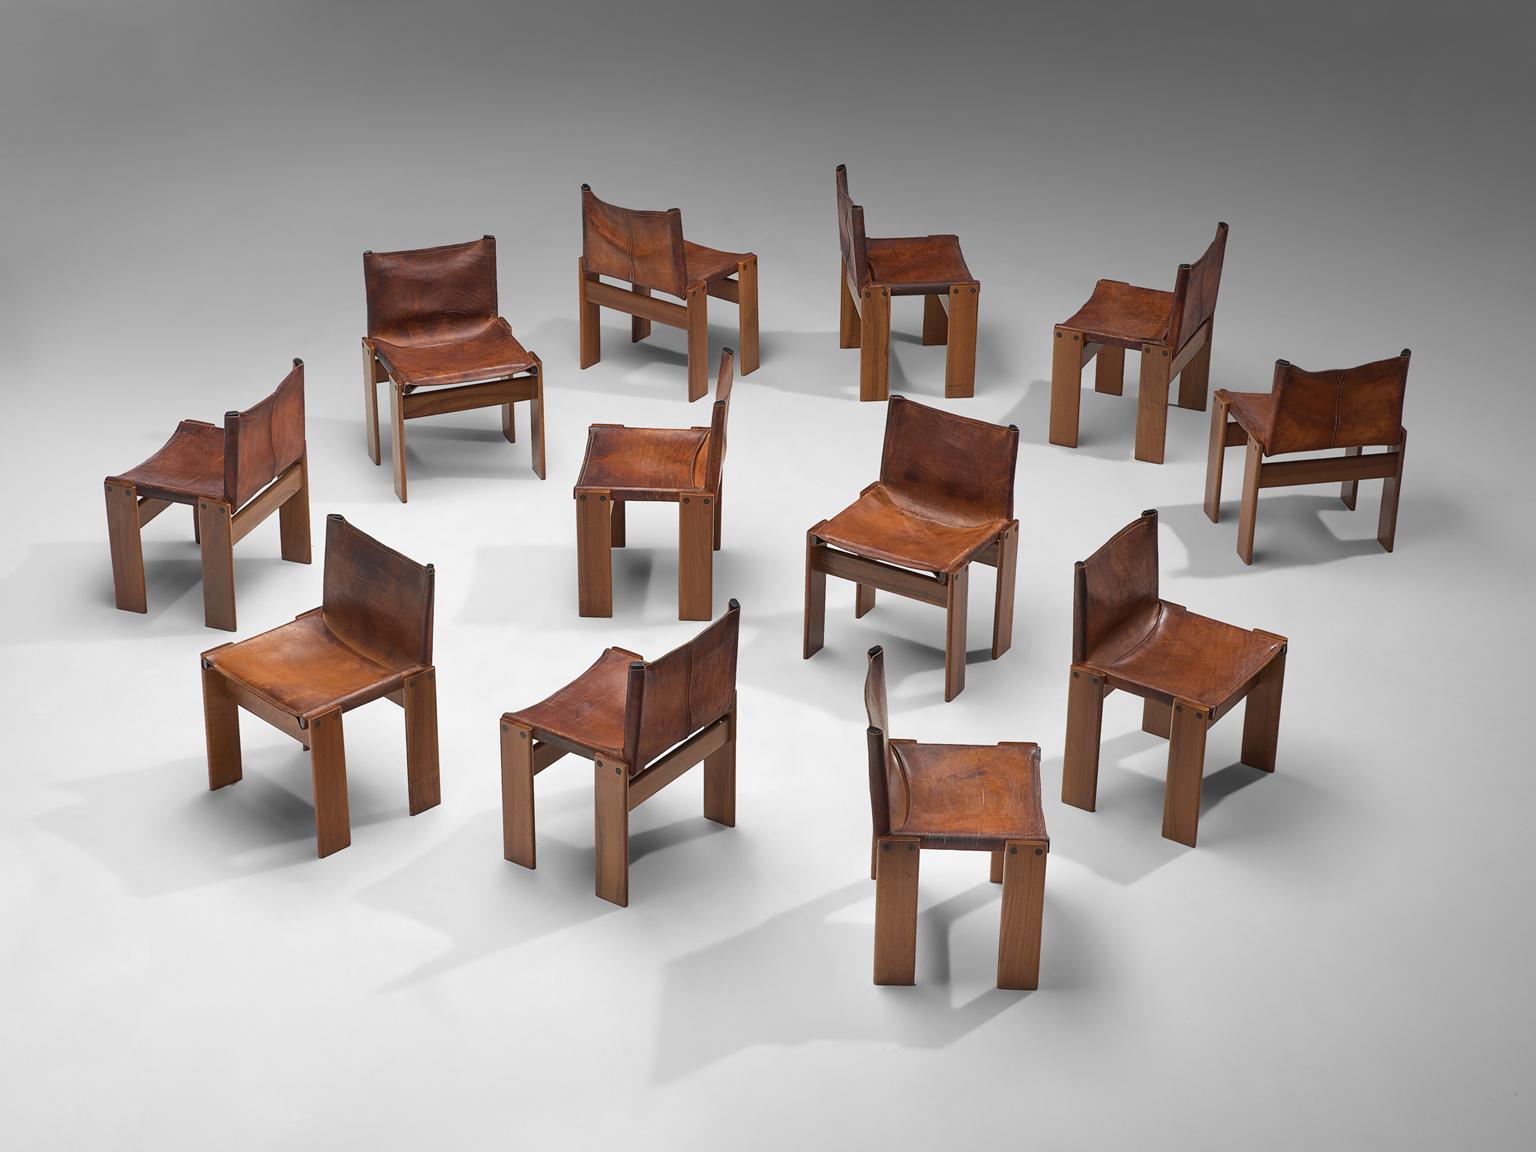 Arfa & Tobia Scarpa, Set of 12 'Monk' dining chairs, oak and cognac leather, Italy, 1974.

This original set of twelve chairs is strong and sturdy in their design. Finding this amount of chairs as an original set with this patinated condition is